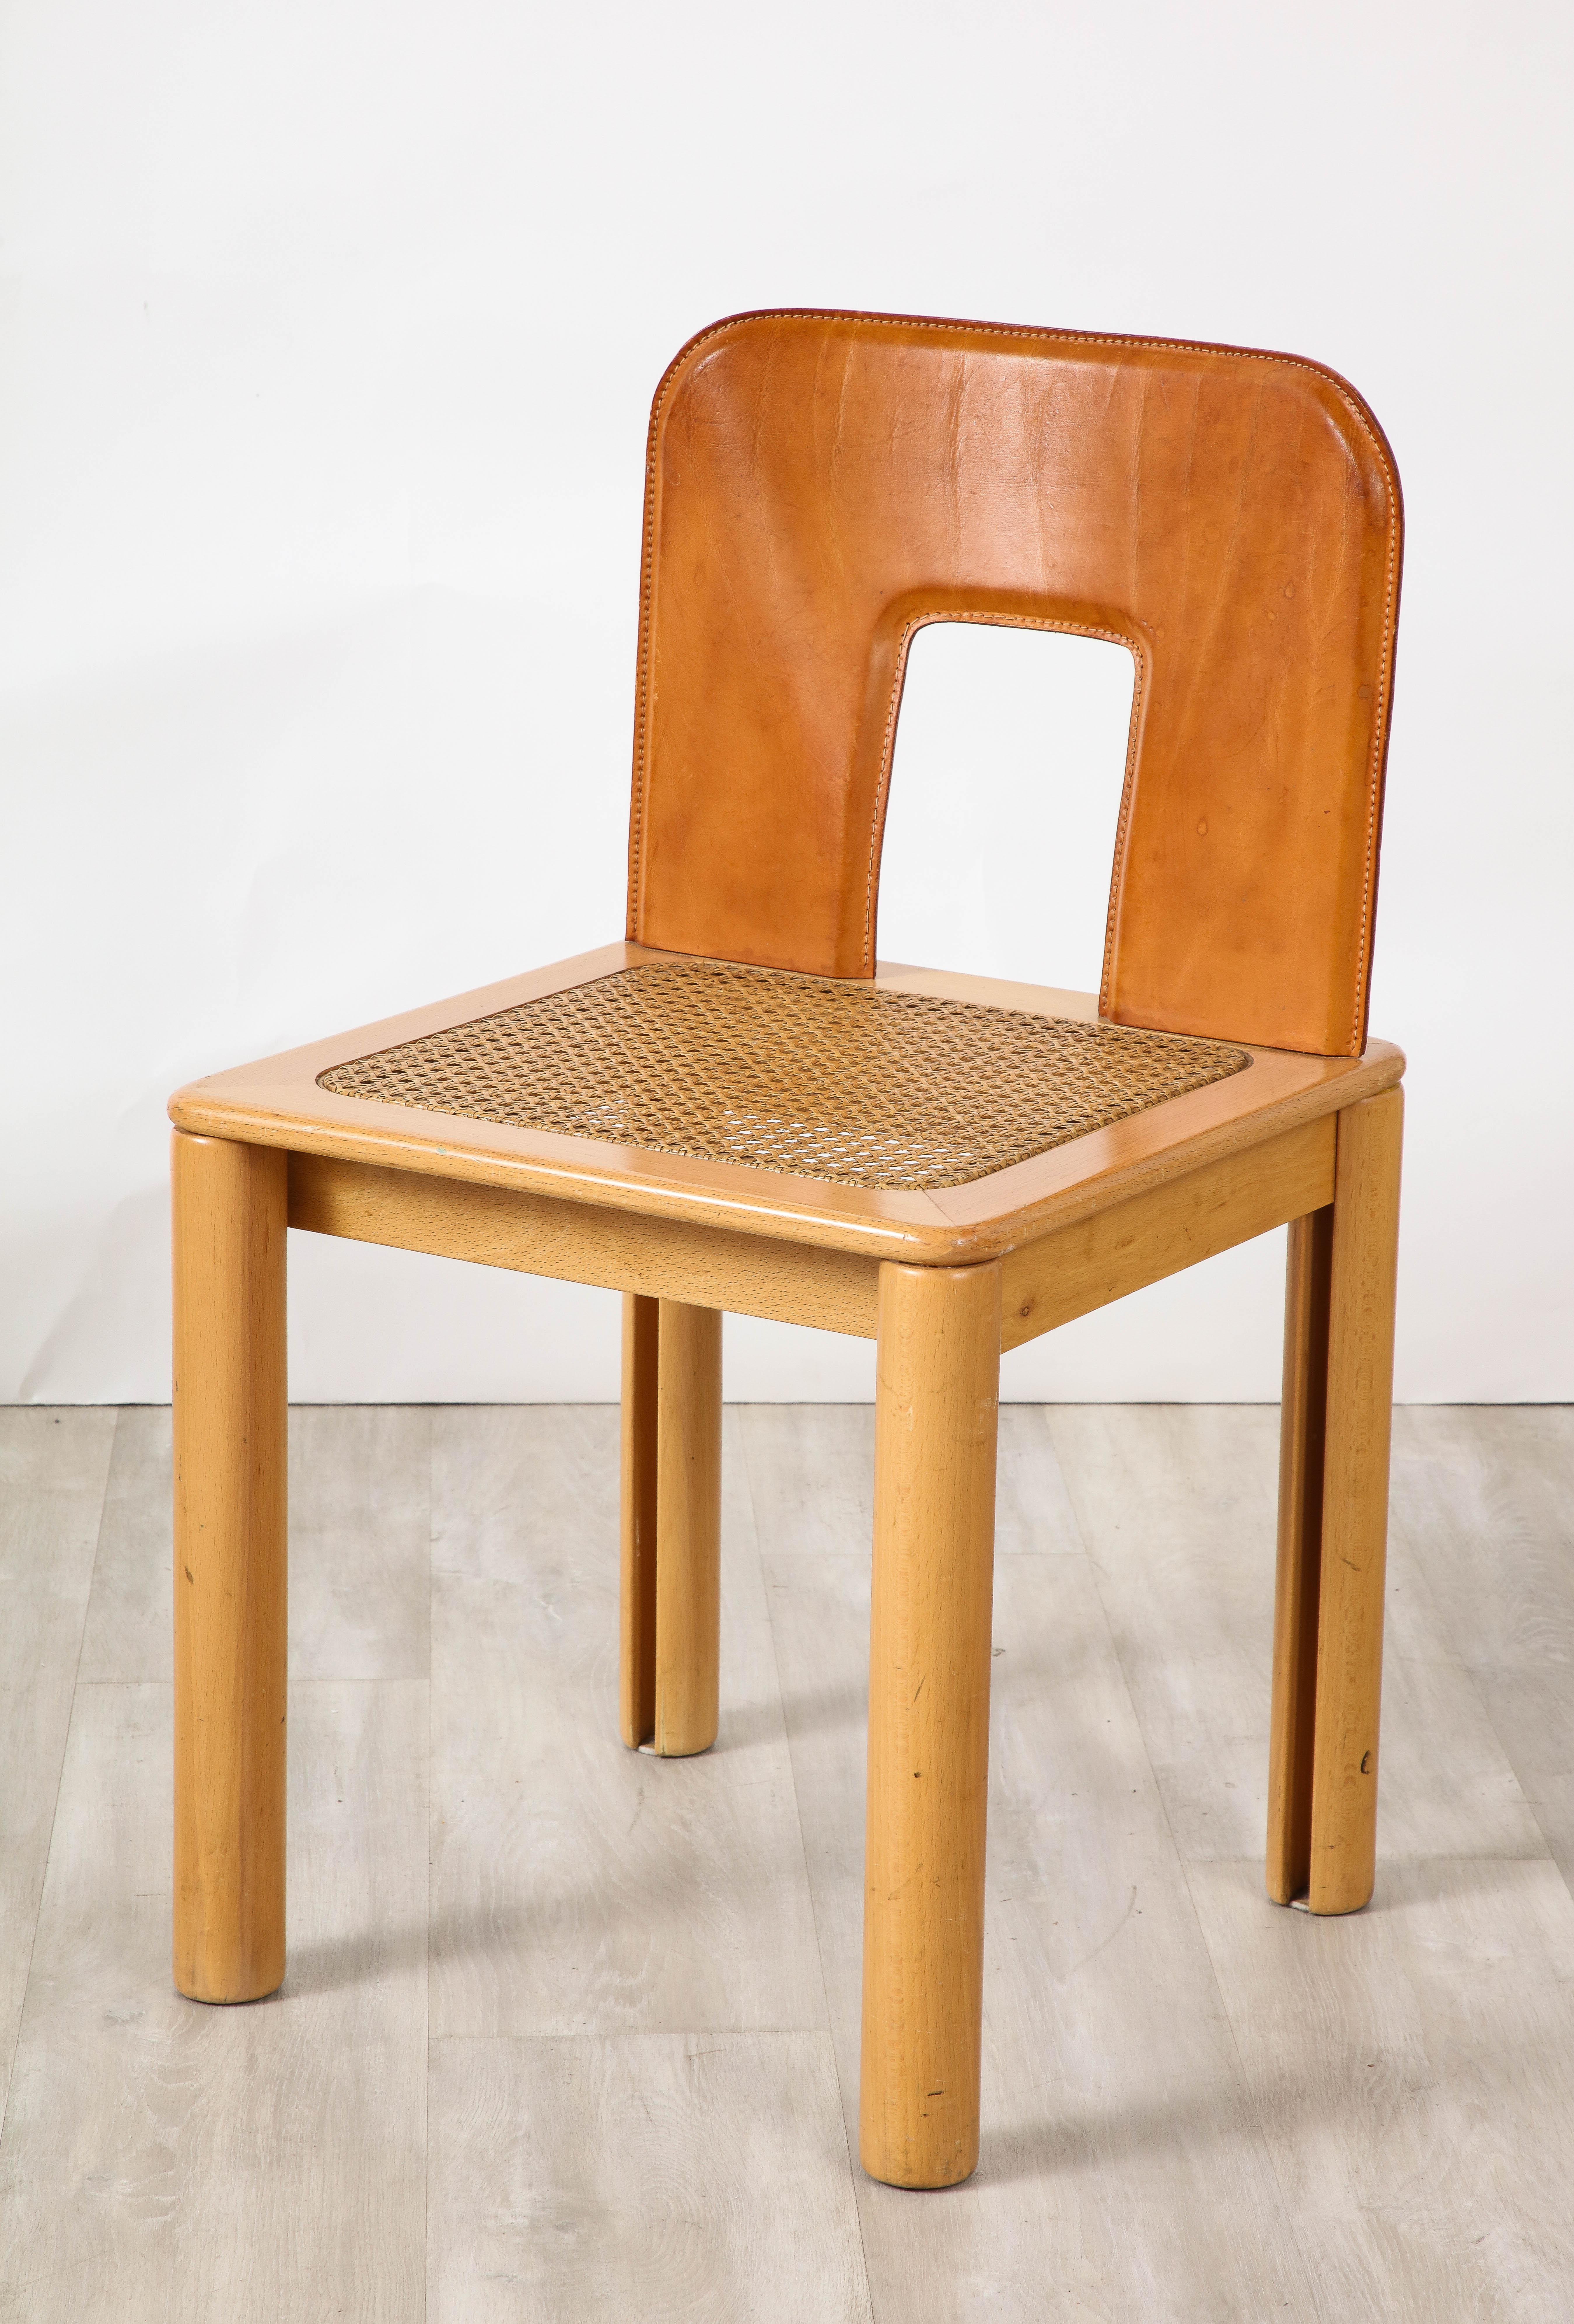 Italian 1970's Dining Chairs with Leather, Wood, Cane Seats, Italy, circa 1970 For Sale 8